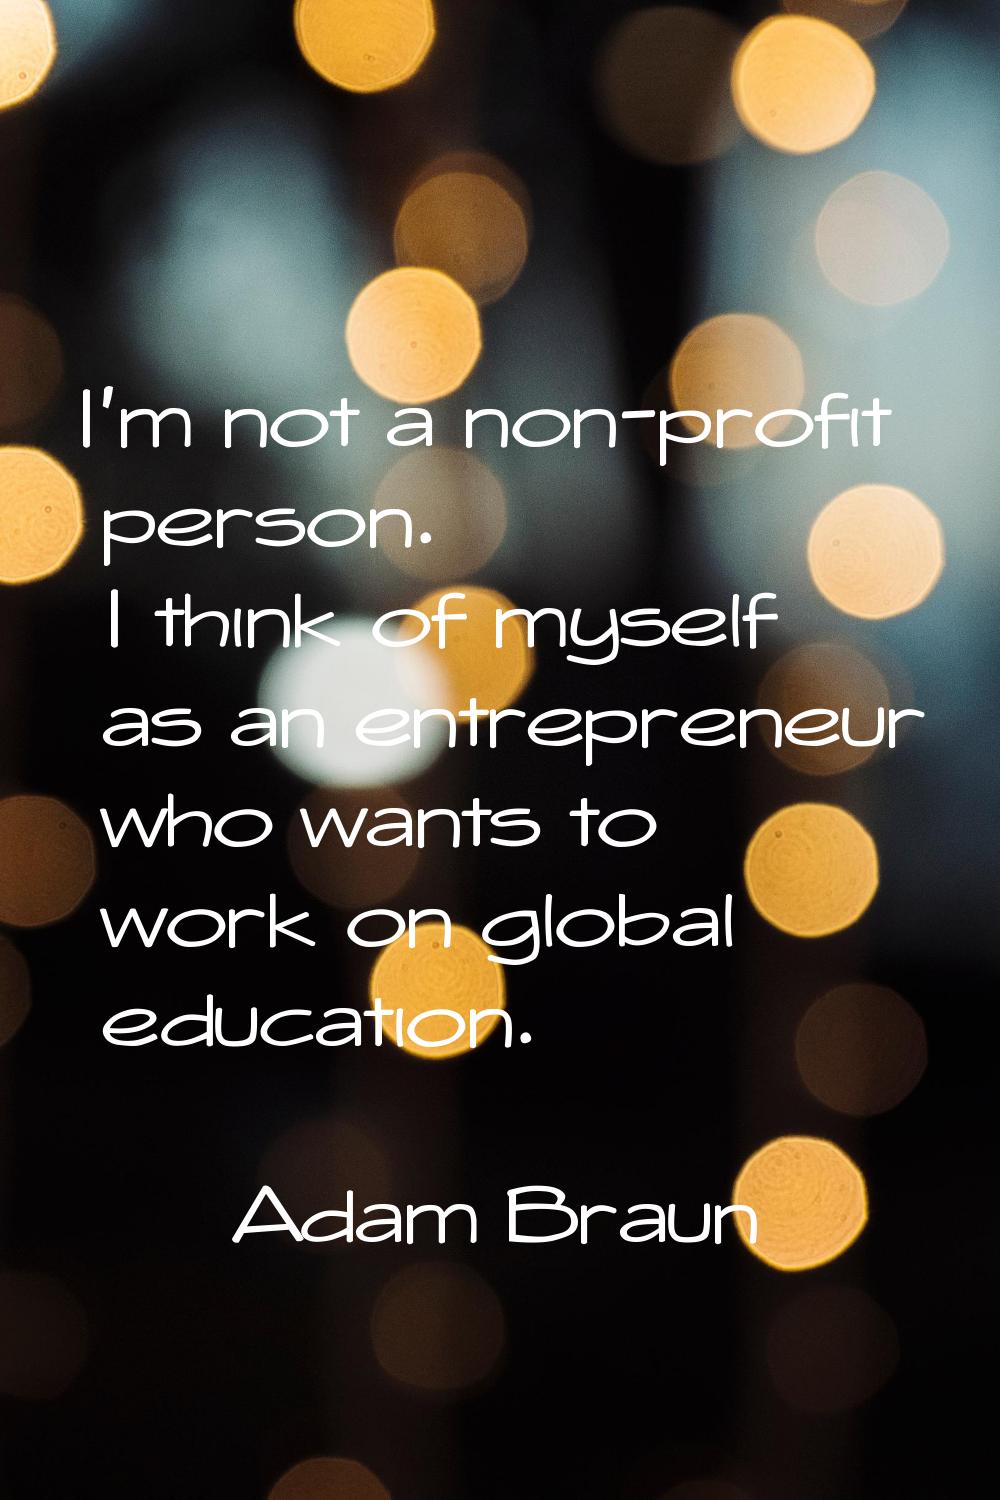 I'm not a non-profit person. I think of myself as an entrepreneur who wants to work on global educa